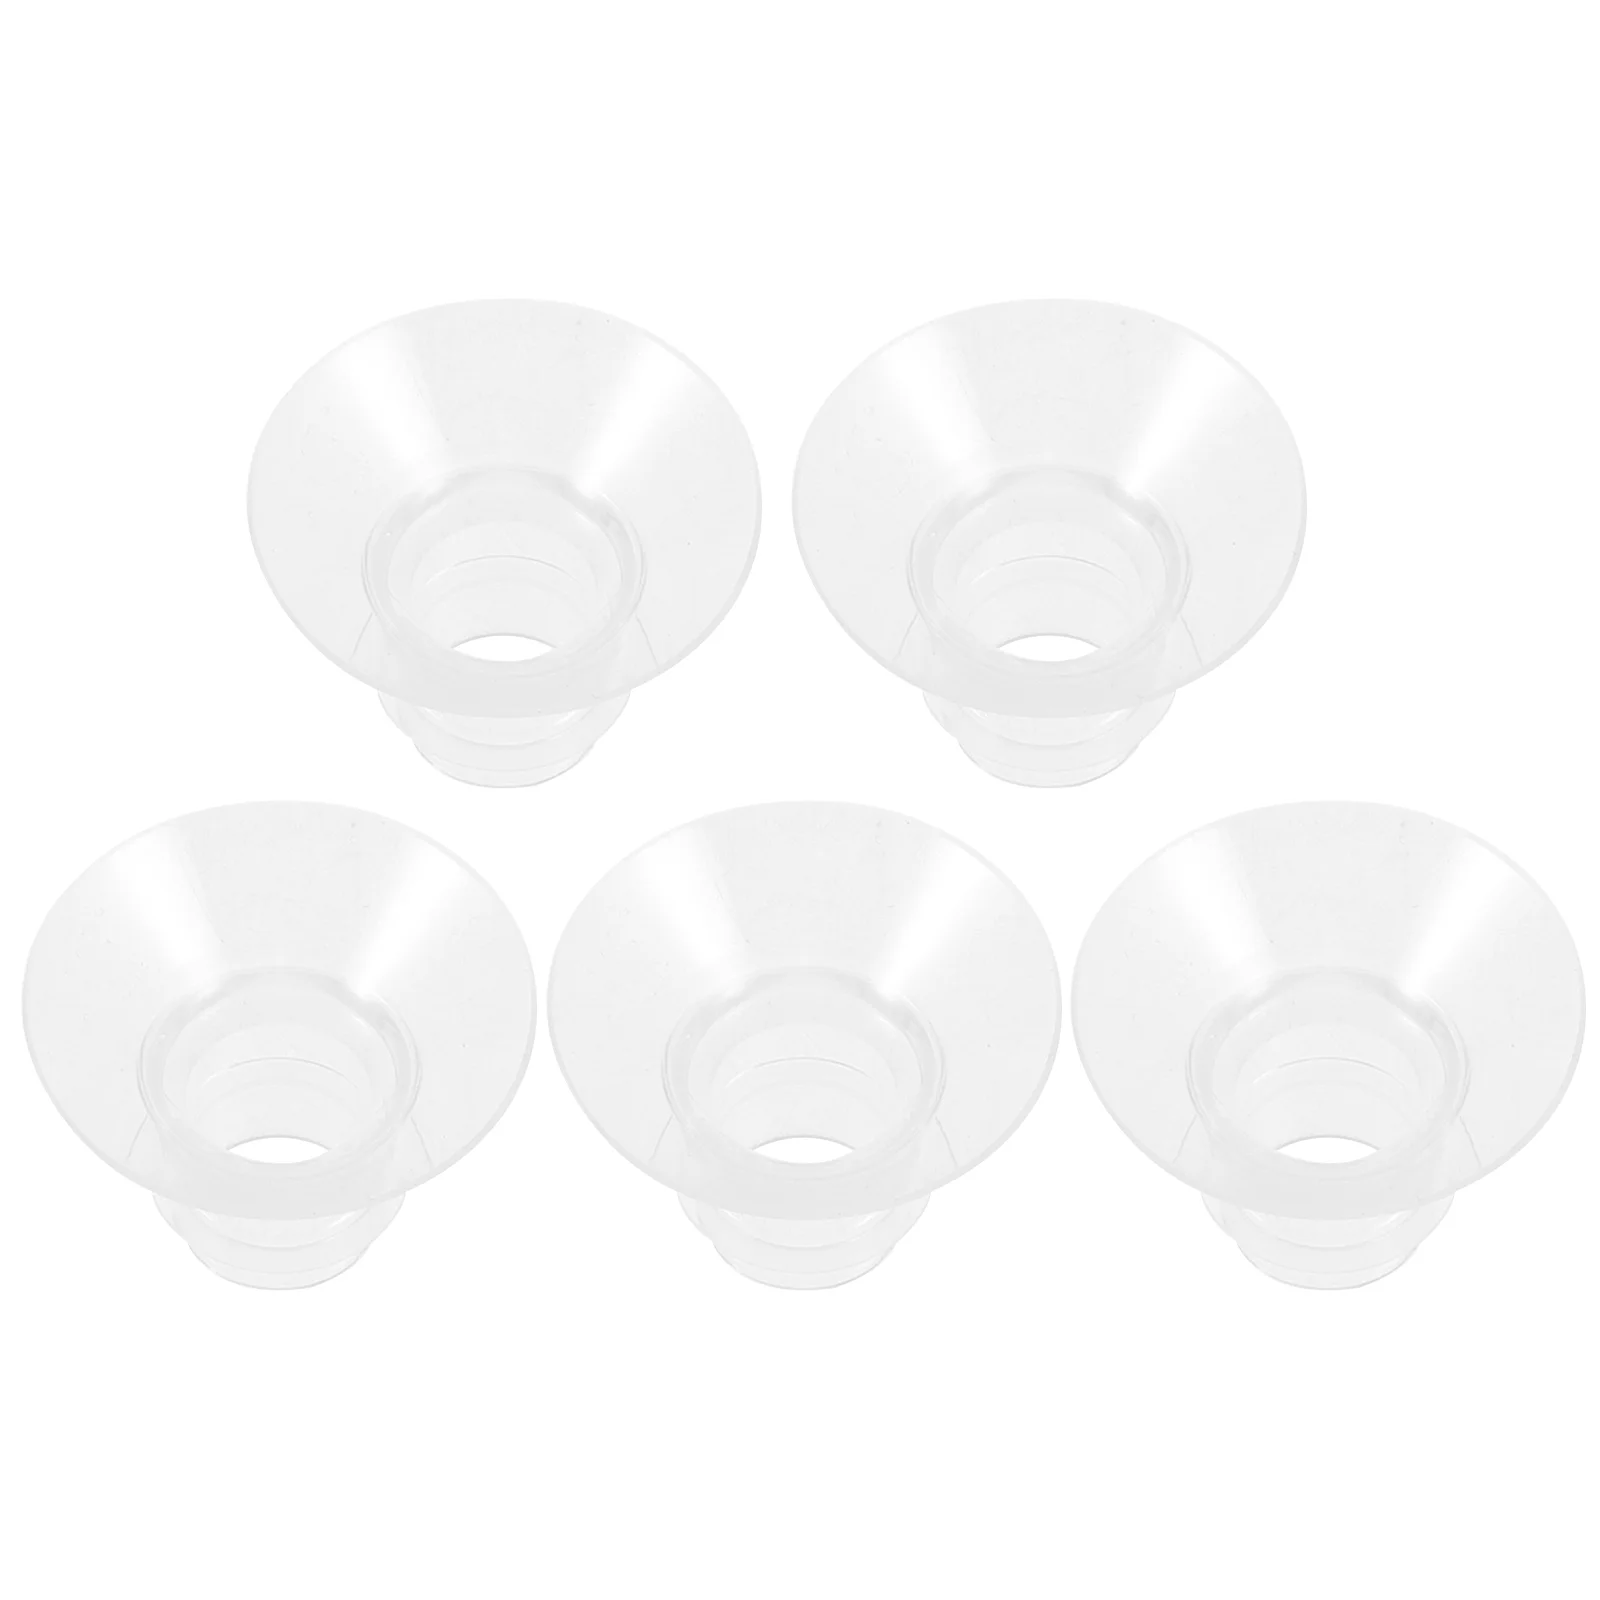 5 Pcs Wearable Breast Pump Horn Size Converter Accessories Flange Inserts 17mm for Replacement Parts 21mm Mother